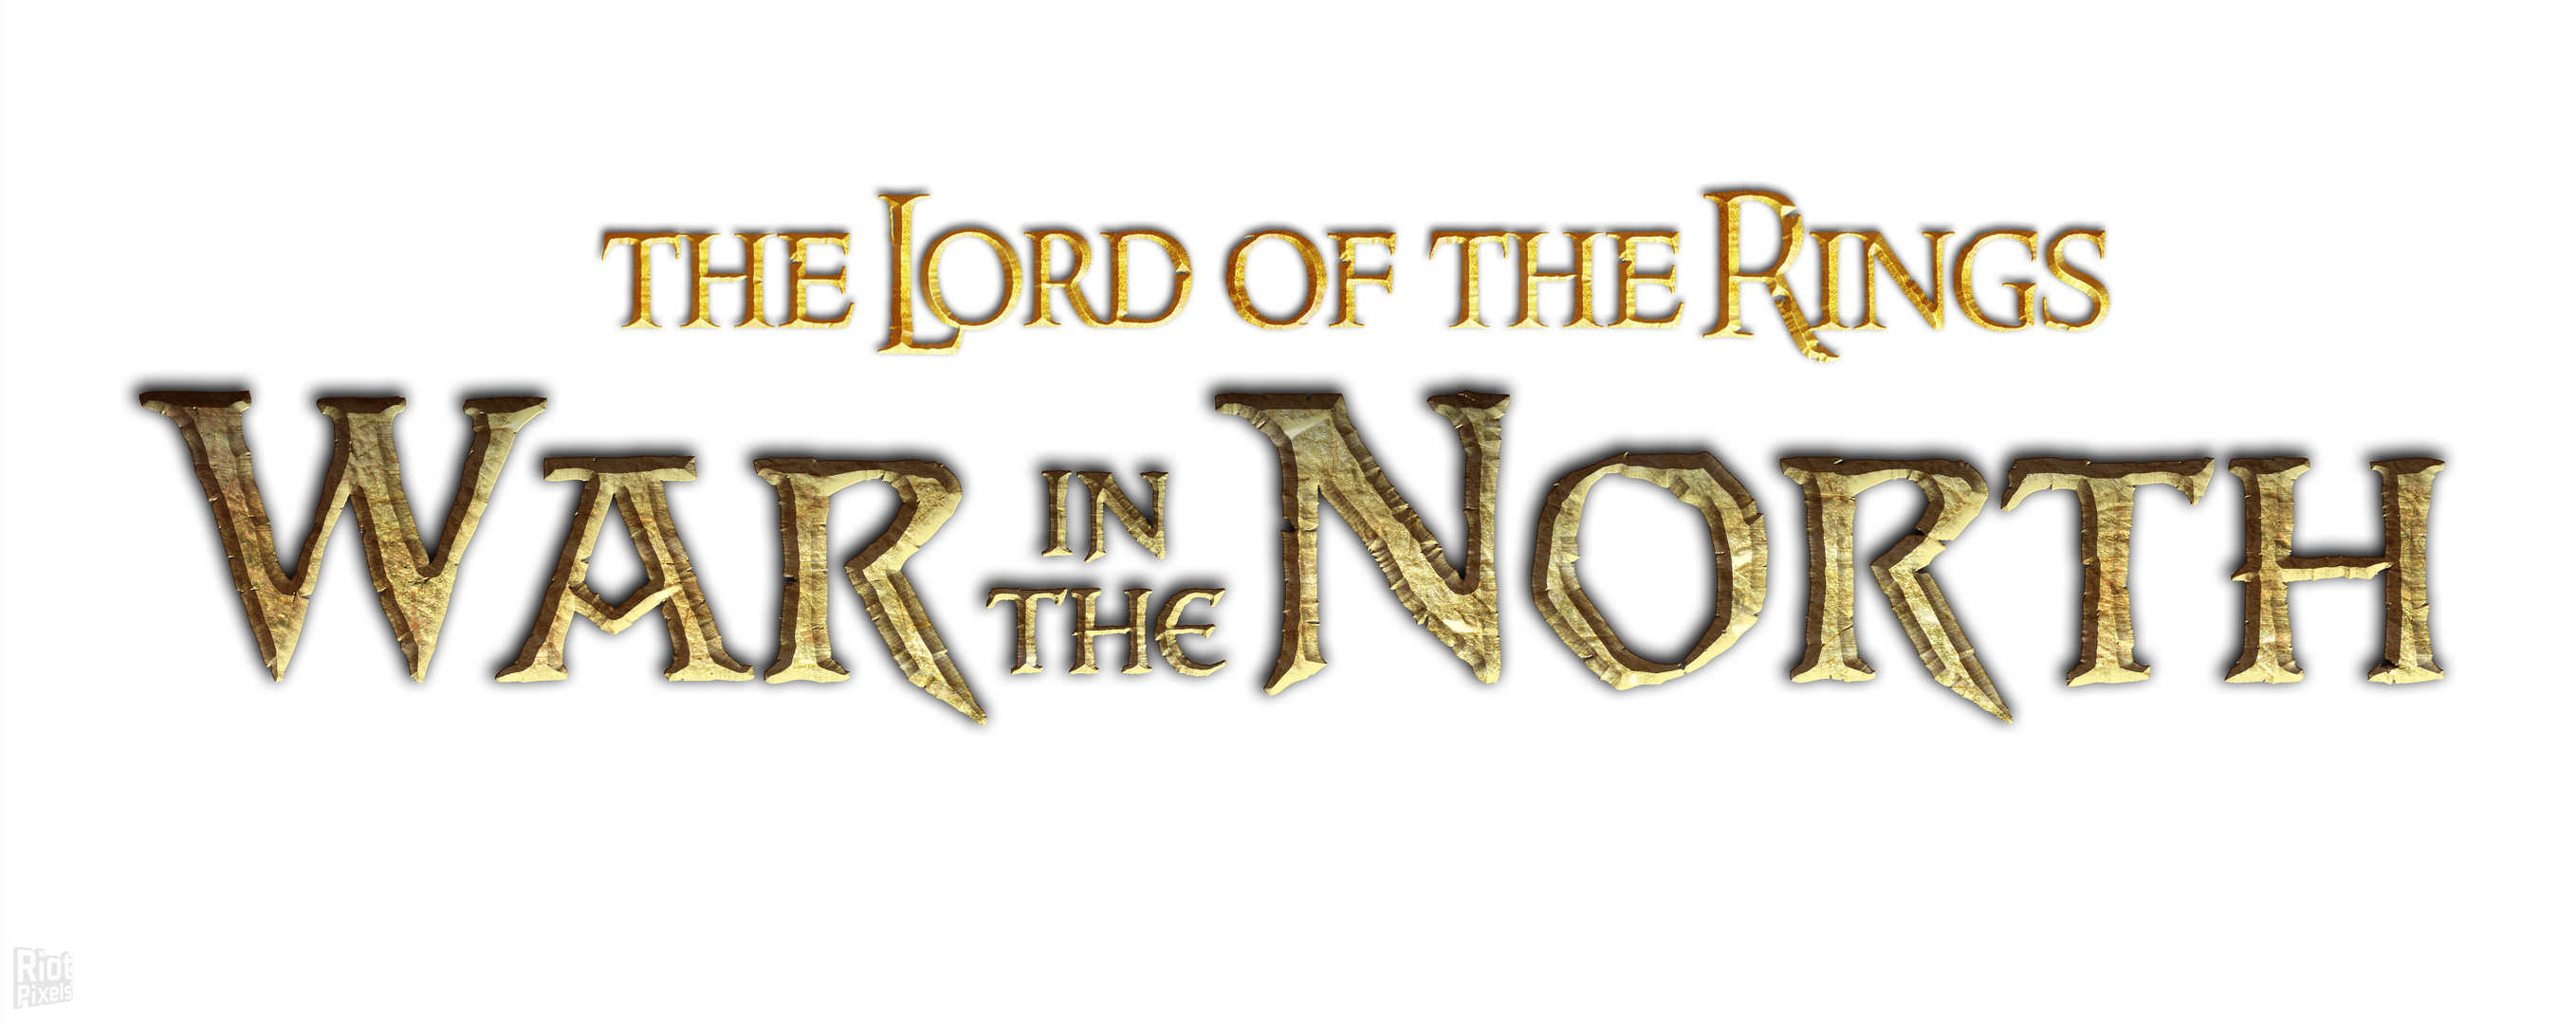 Lord of the rings war in the north купить steam фото 64